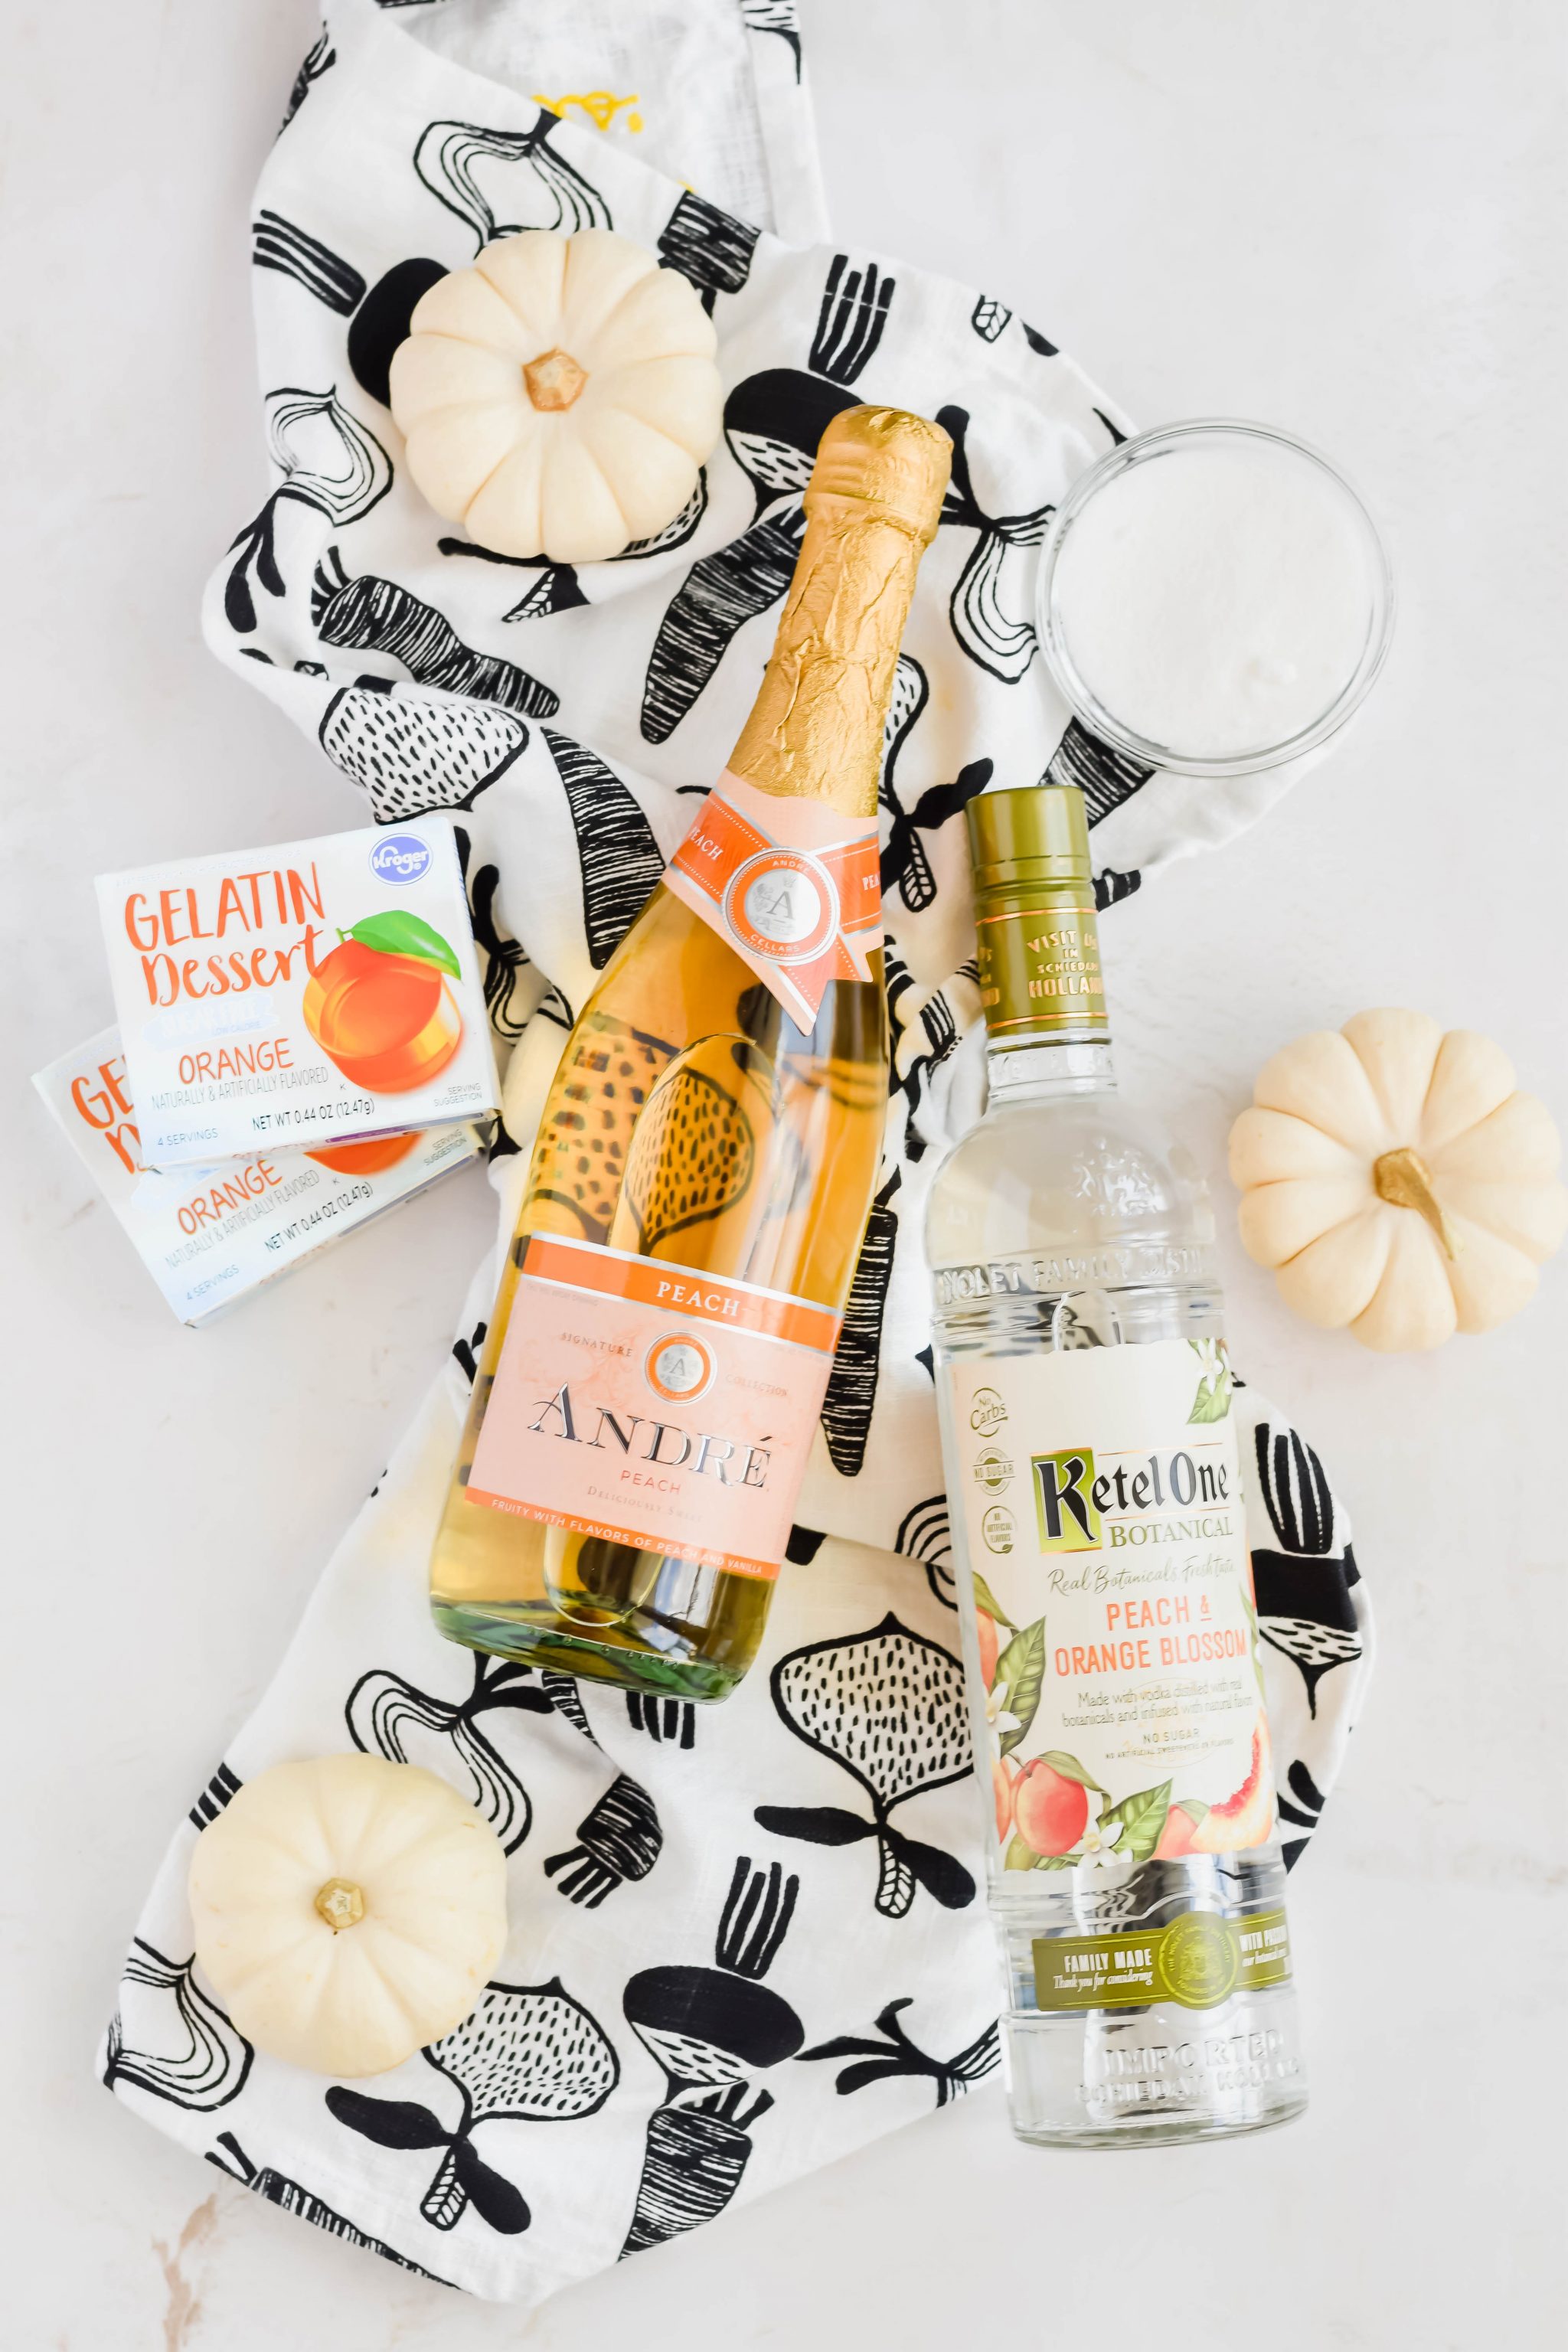 bottle of champagne, vodka, and gelatin mix boxes on patterned kitchen towel.